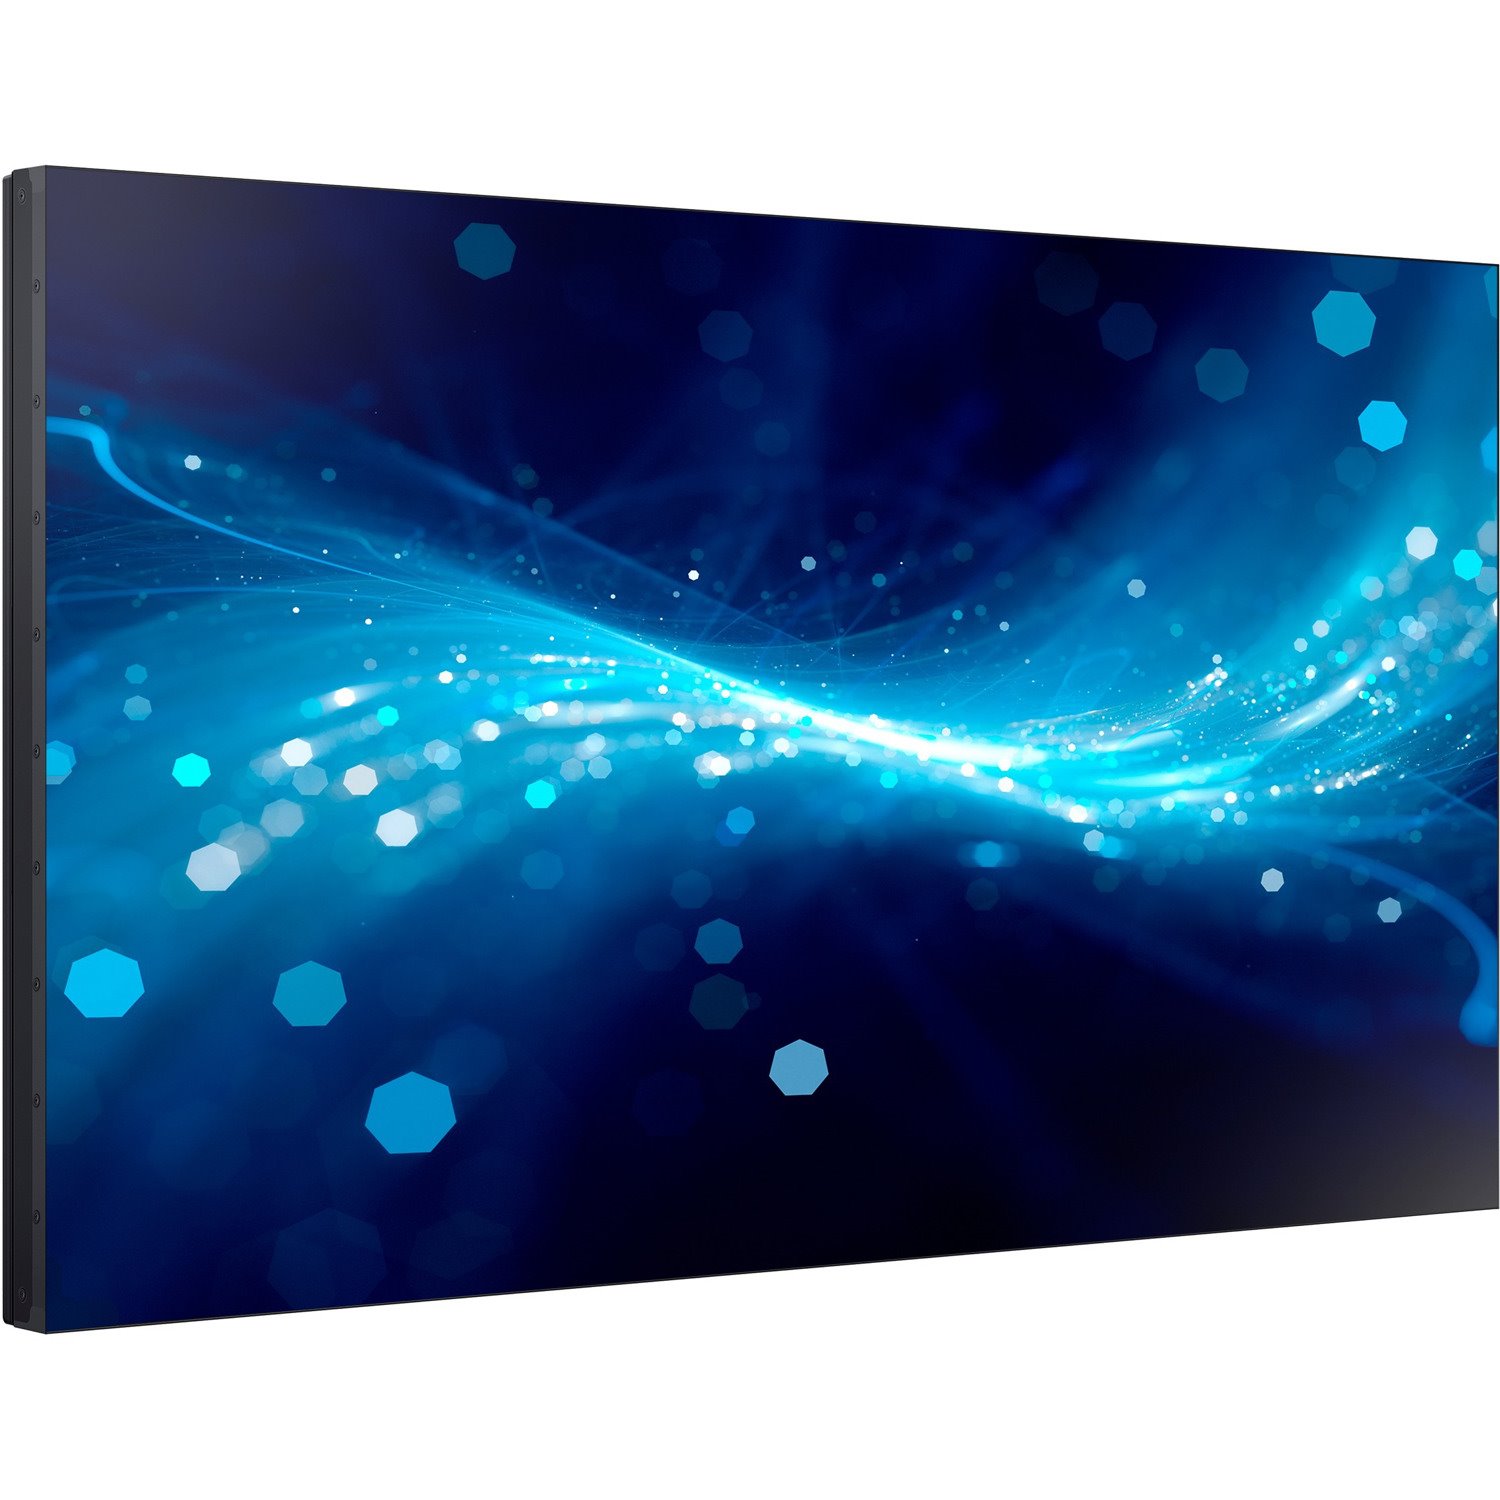 Samsung UH46N-E - Extreme Narrow Bezel Videowall Display for Business